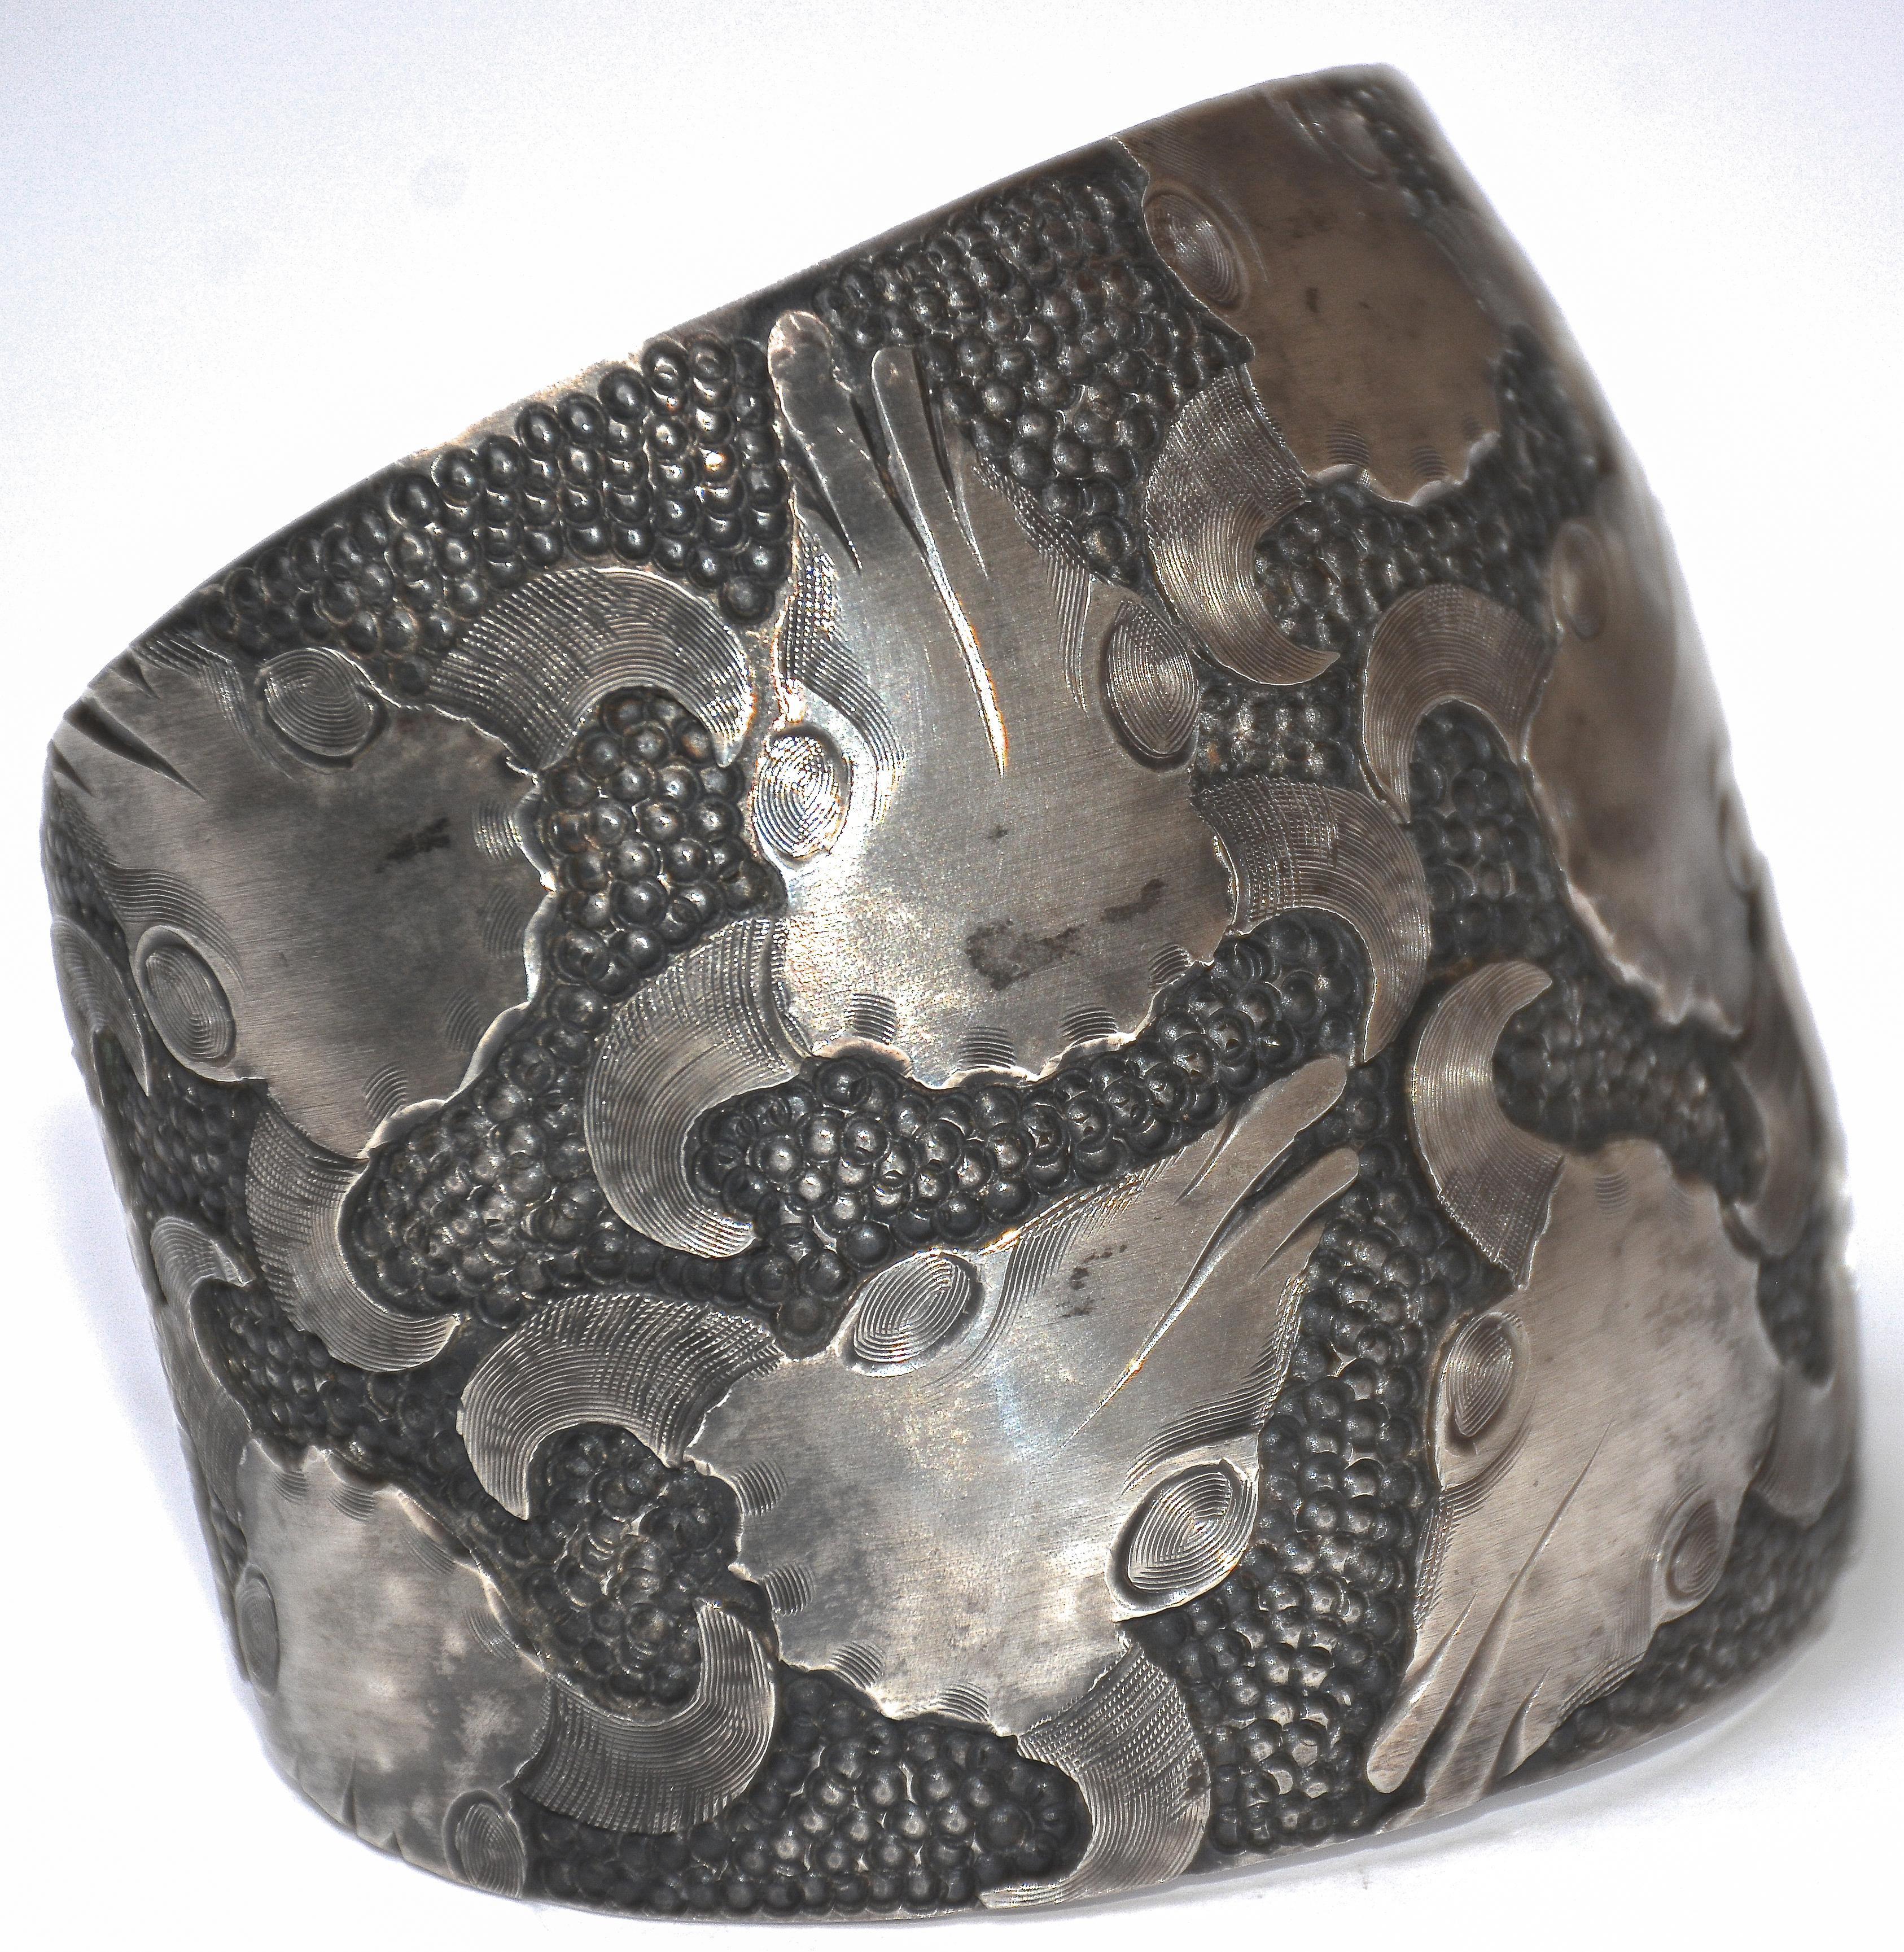 This Buffalo Skull motif Sterling Silver Cuff Bracelet is classic early piece by renown California saddle maker and silversmith Jeremiah Watt. 

Stamped 